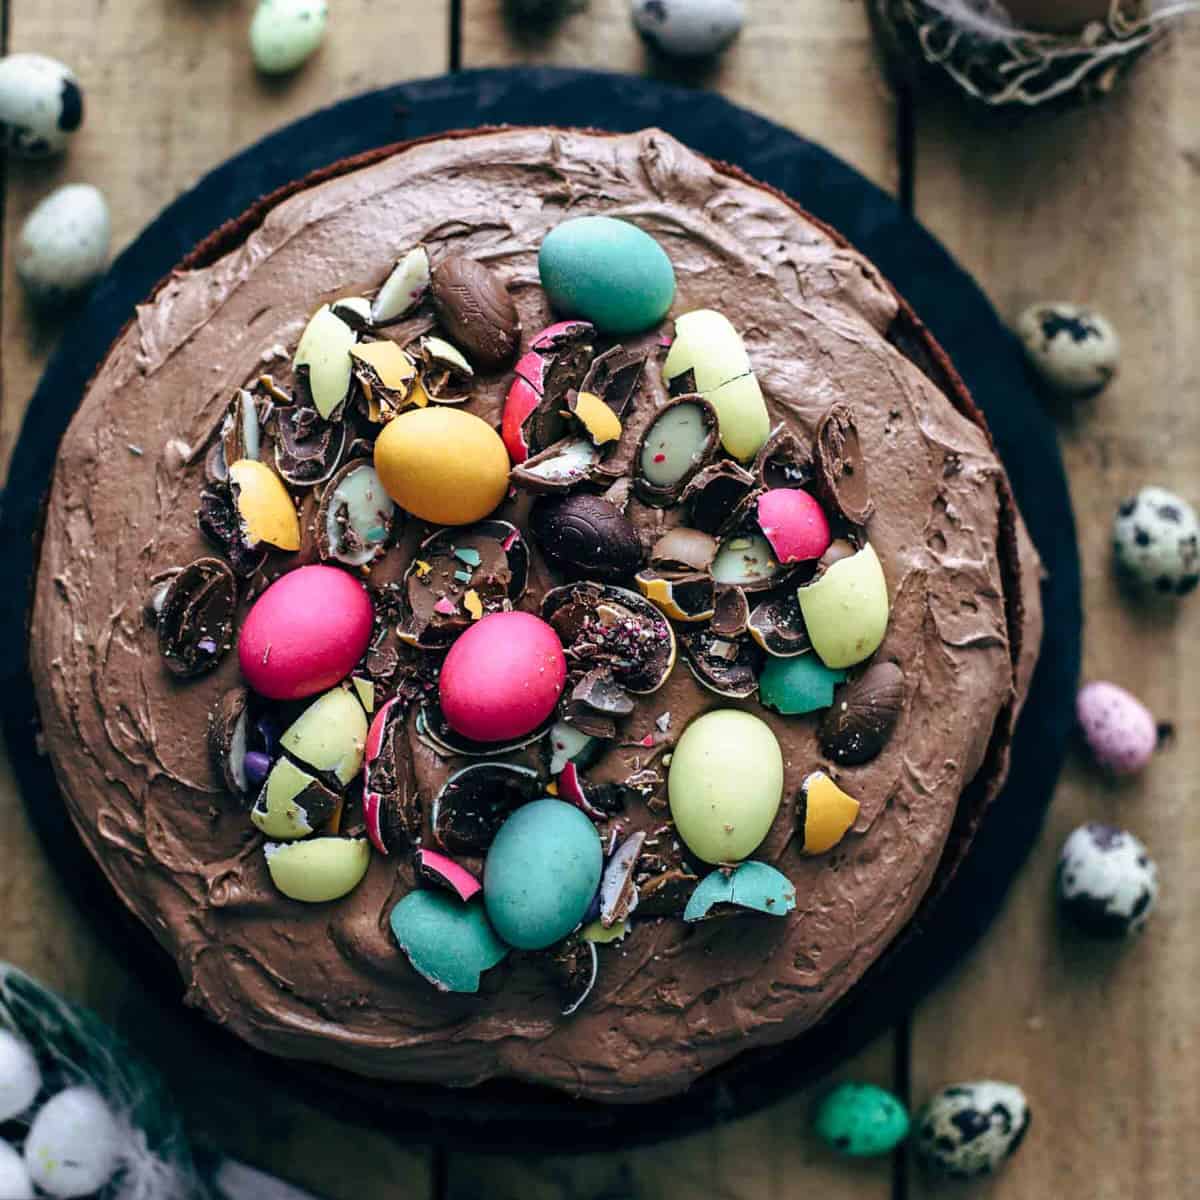 Top view of a frosted chocolate cake with chocolate eggs on top